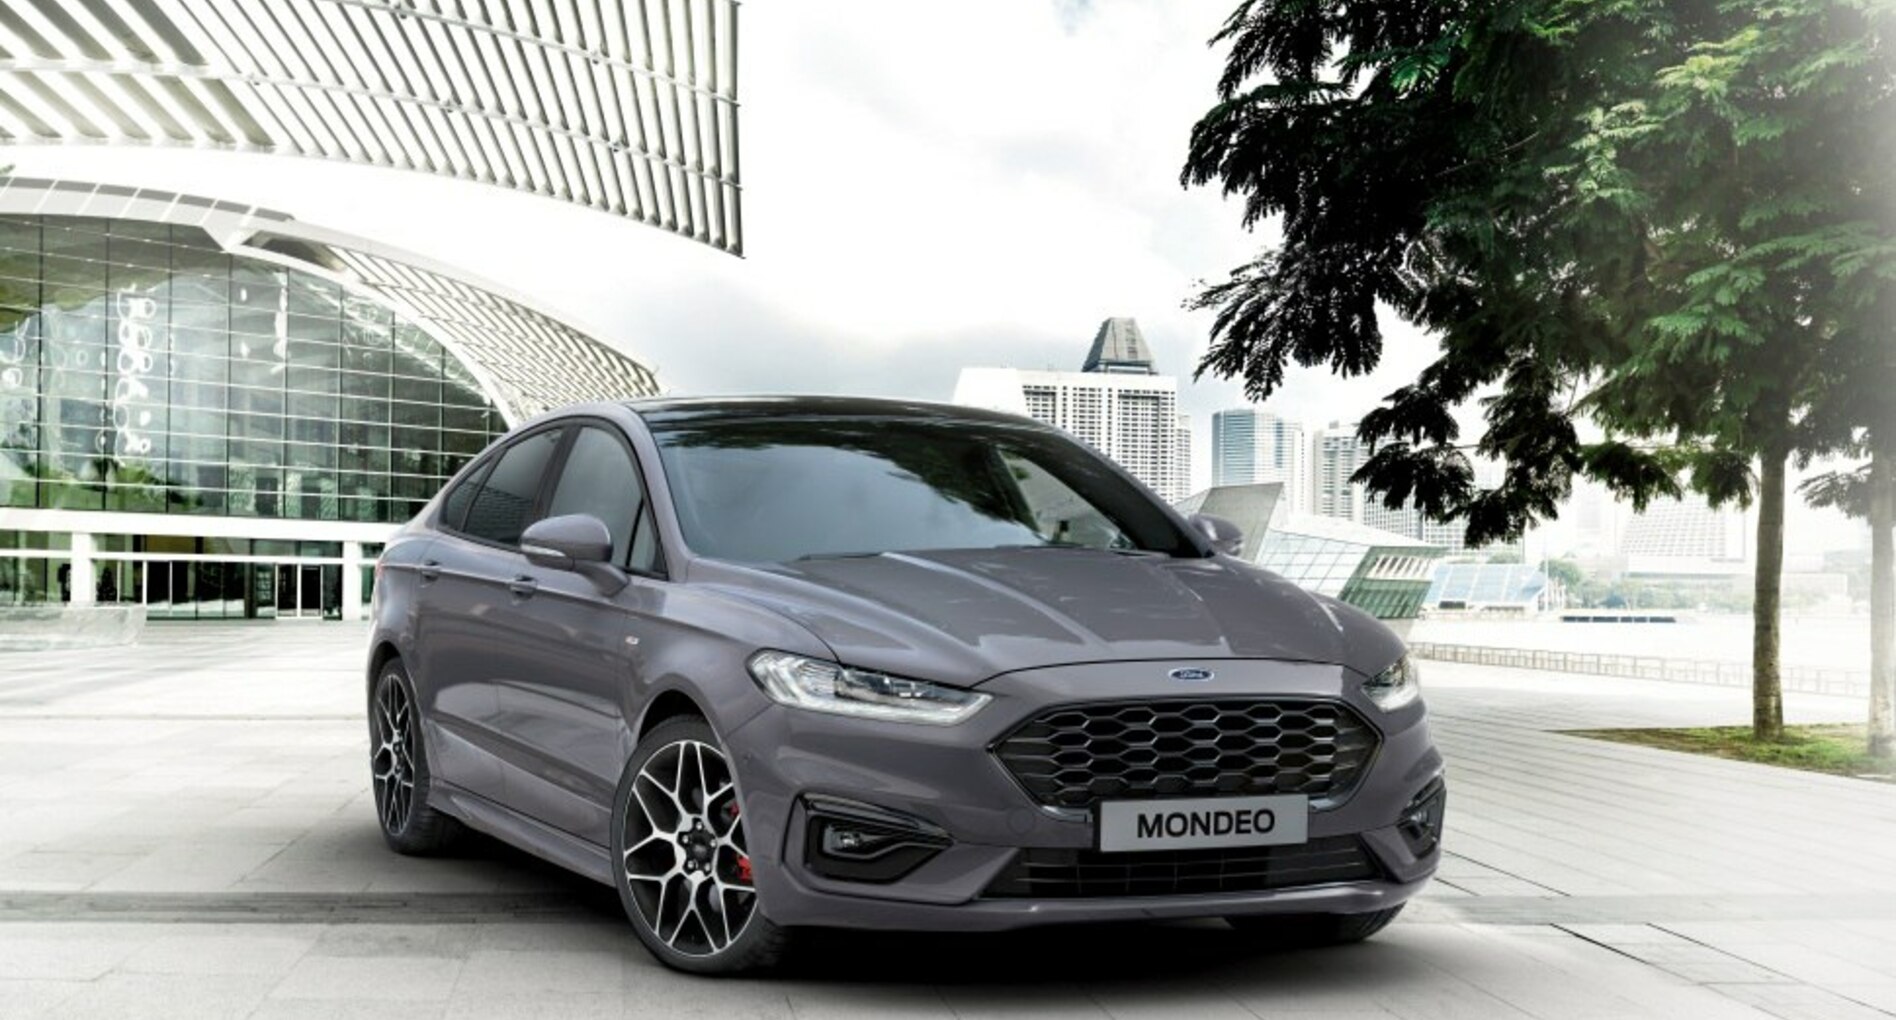 Ford Mondeo IV Hatchback (facelift 2019) 2.0 EcoBlue (120 Hp) Automatic 2019, 2020, 2021 